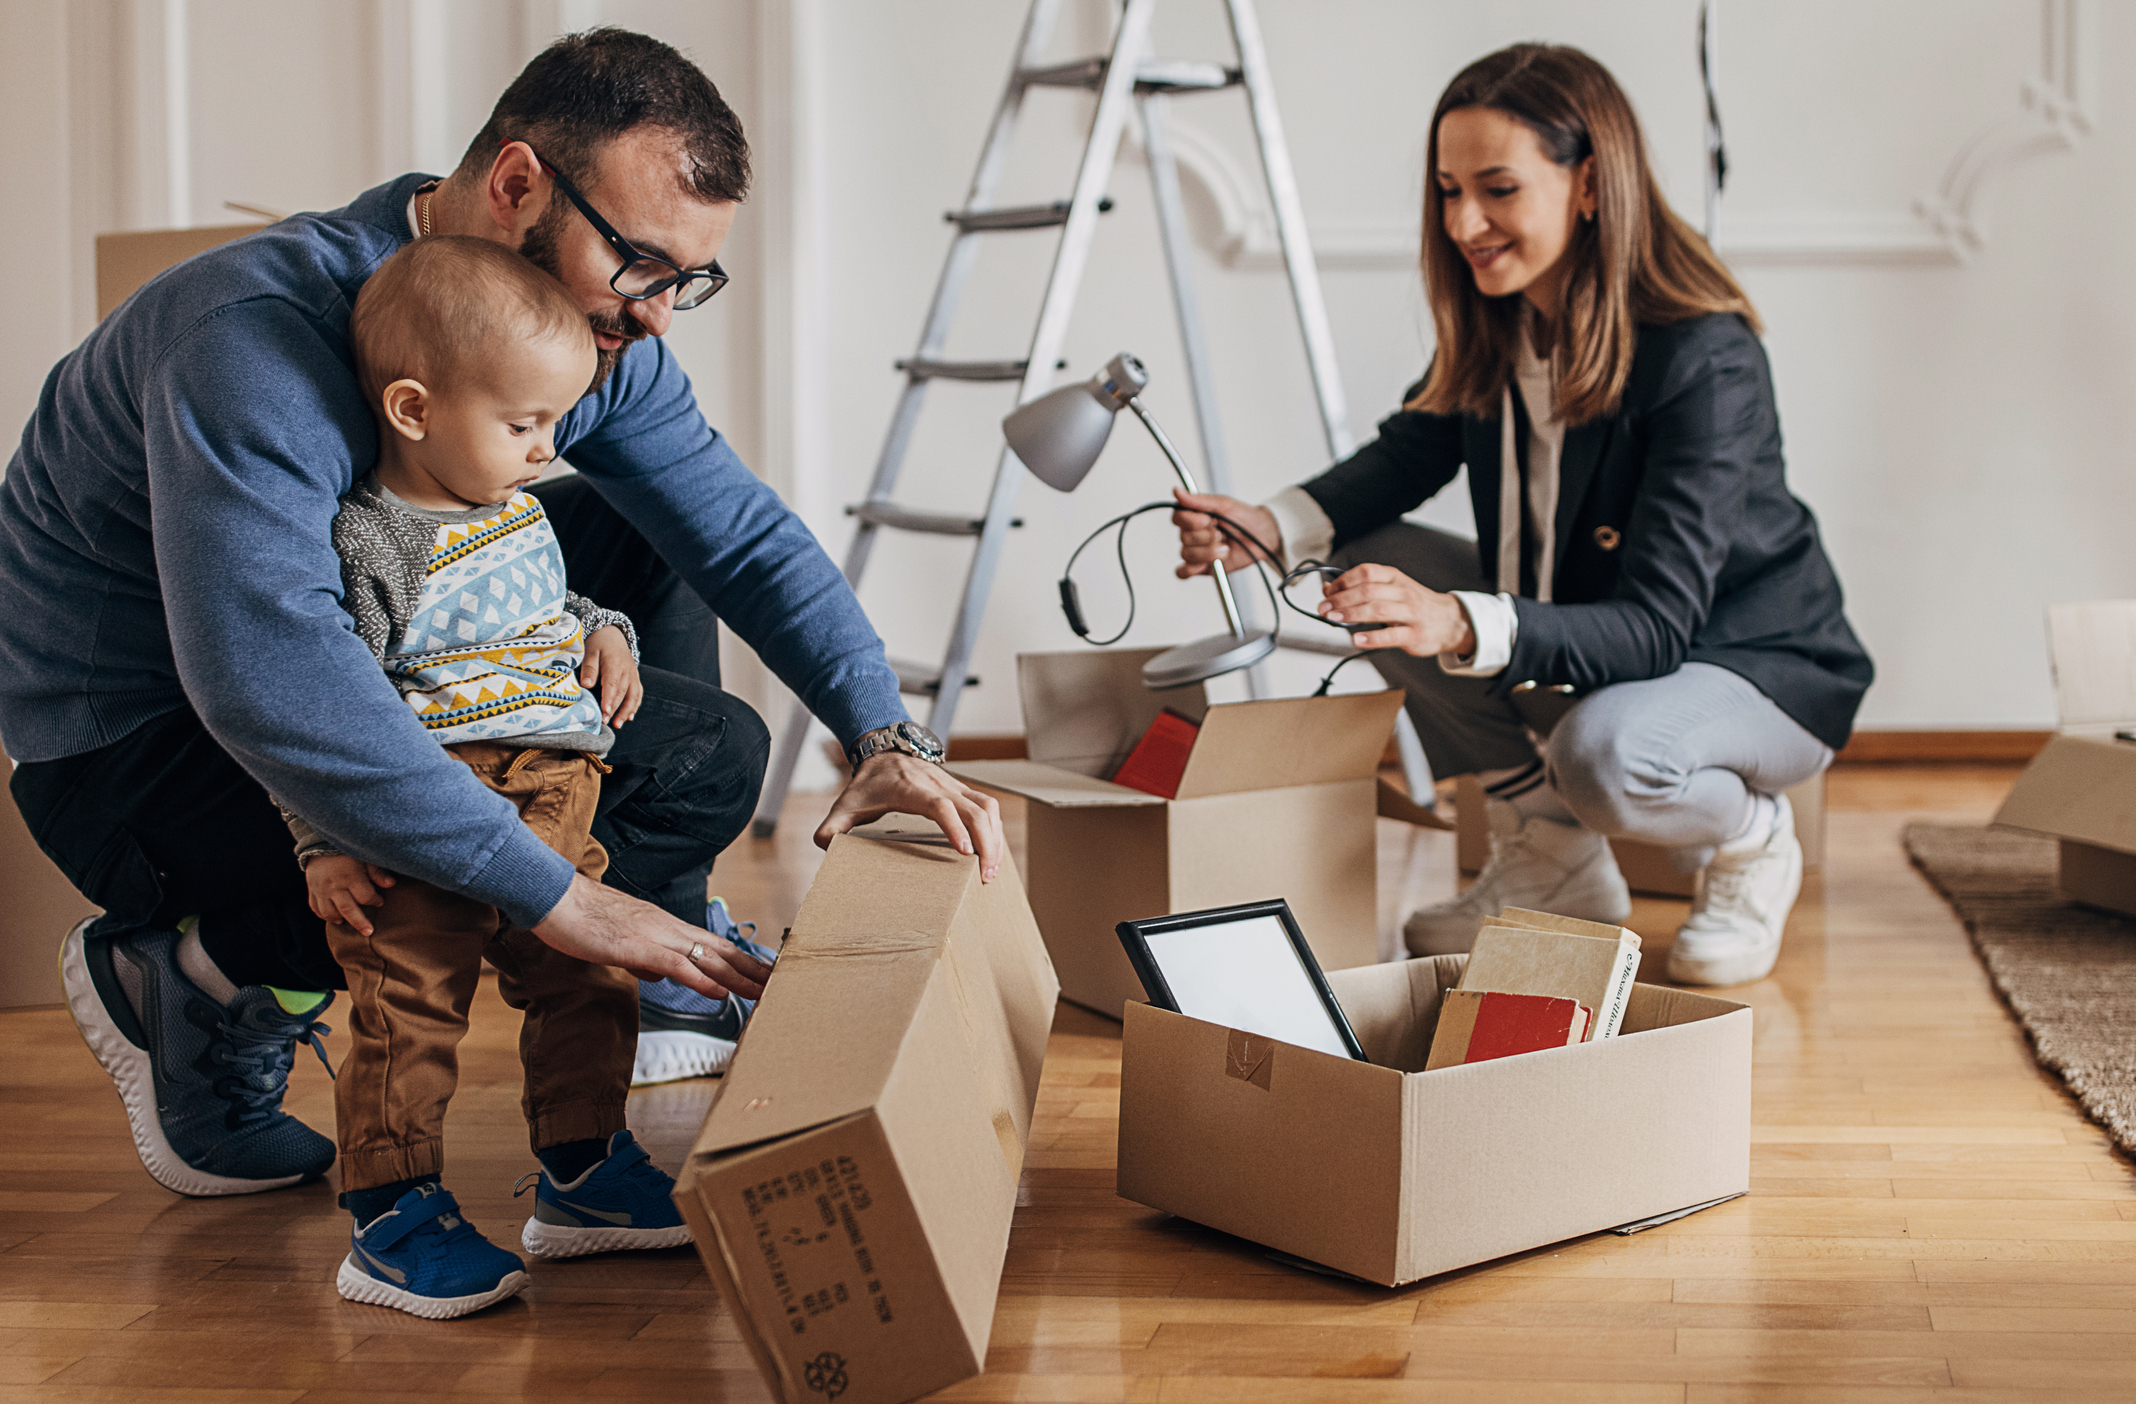 A young couple and their baby unpack boxes in their new home.